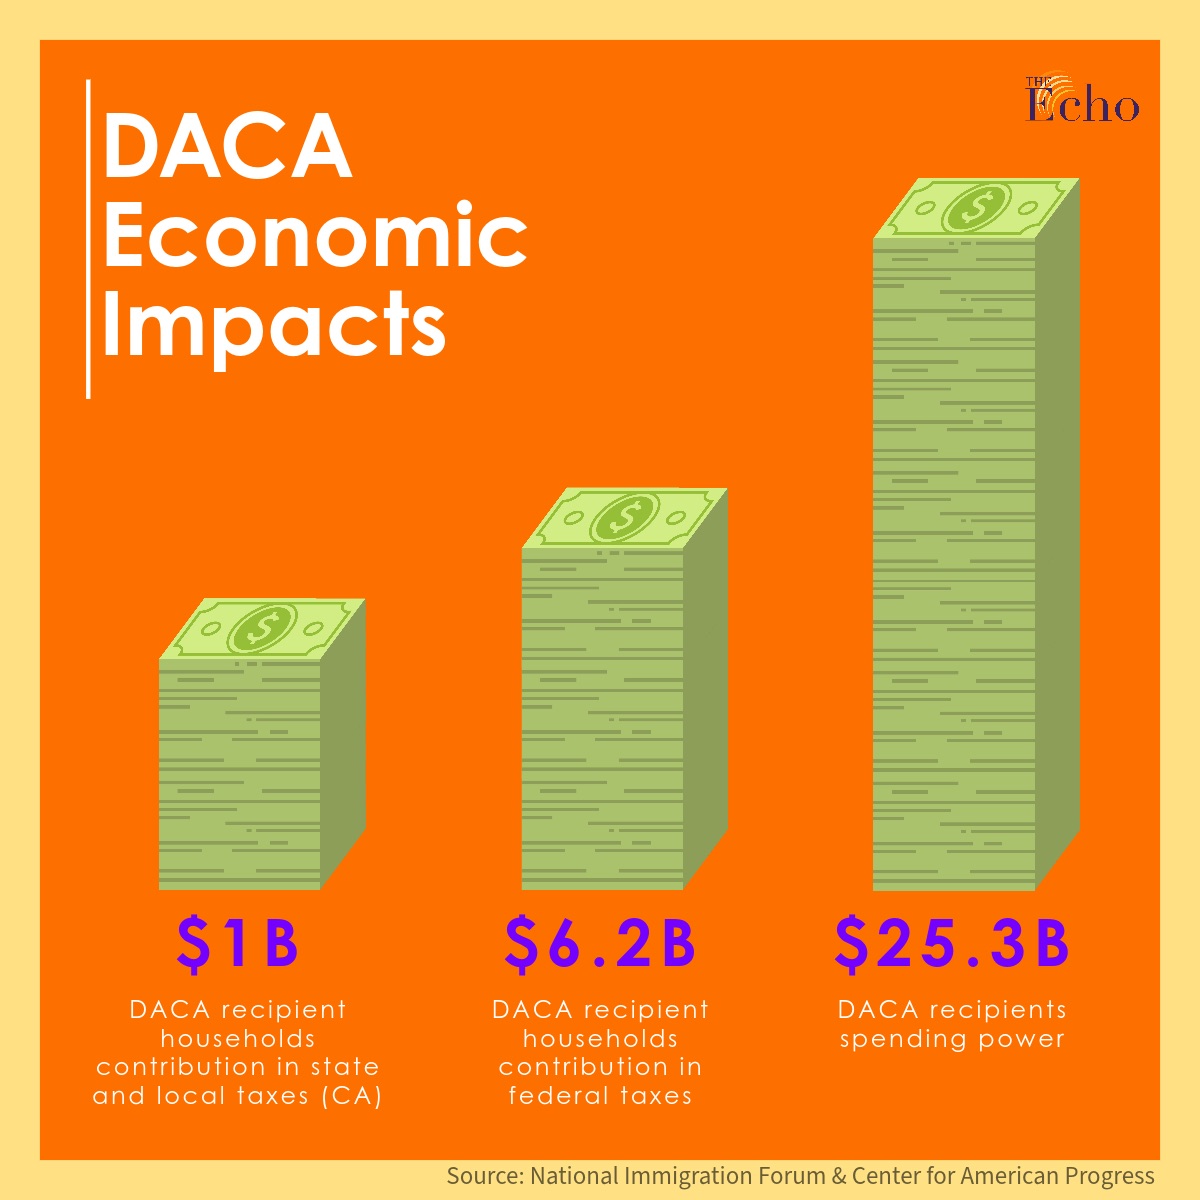 The graph demonstrates the economic impact DACA recipients have in America.